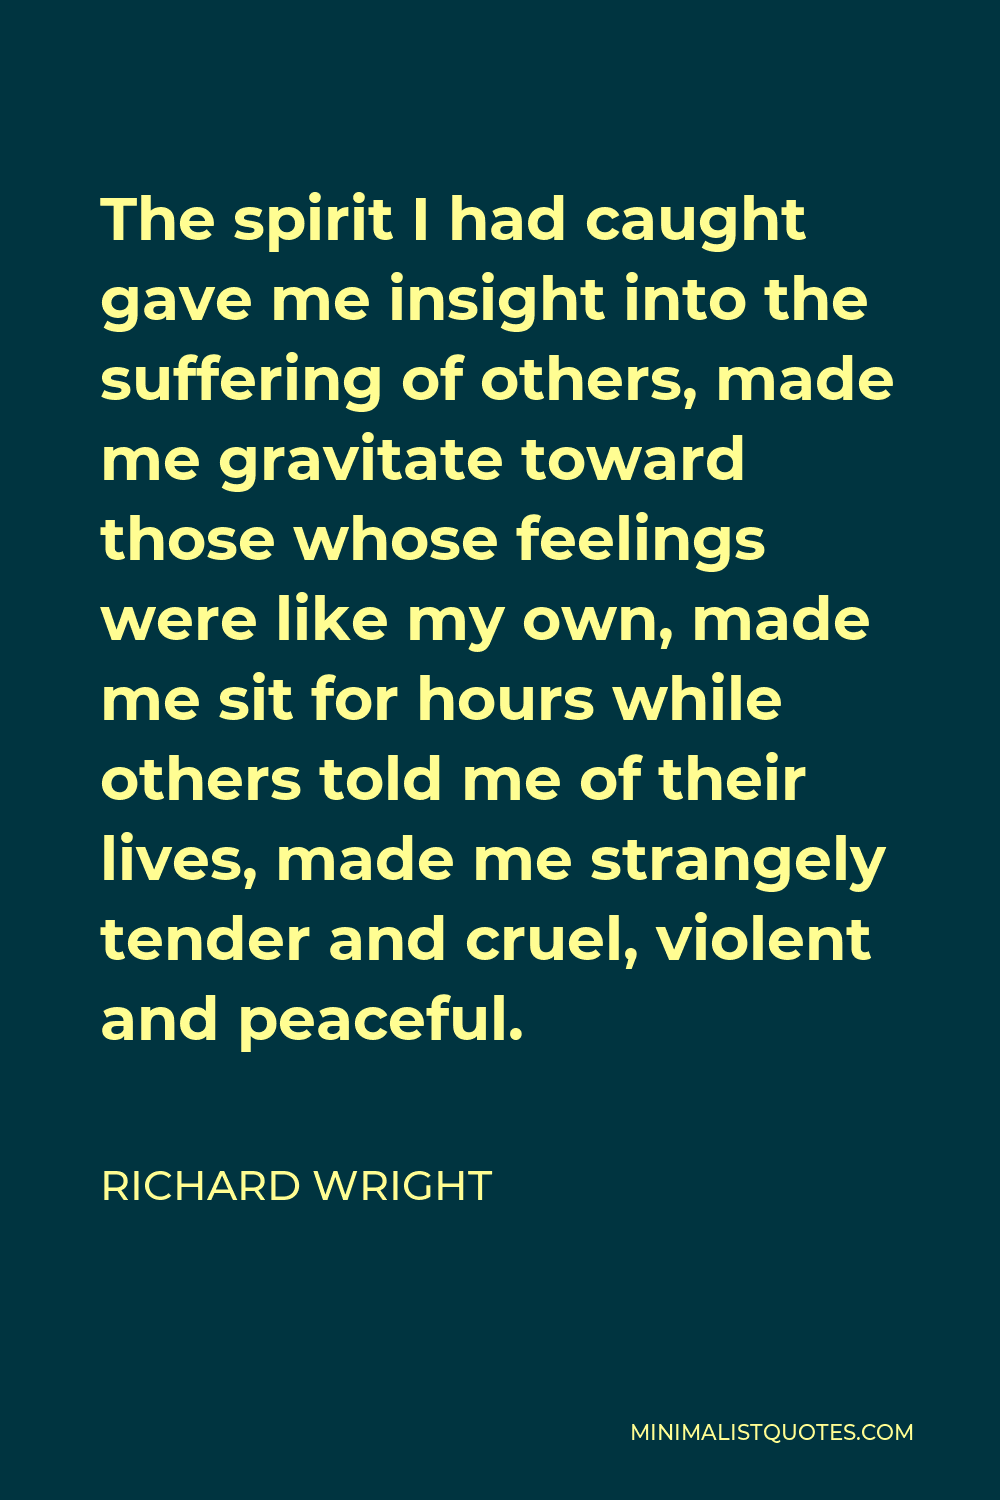 Richard Wright Quote - The spirit I had caught gave me insight into the suffering of others, made me gravitate toward those whose feelings were like my own, made me sit for hours while others told me of their lives, made me strangely tender and cruel, violent and peaceful.